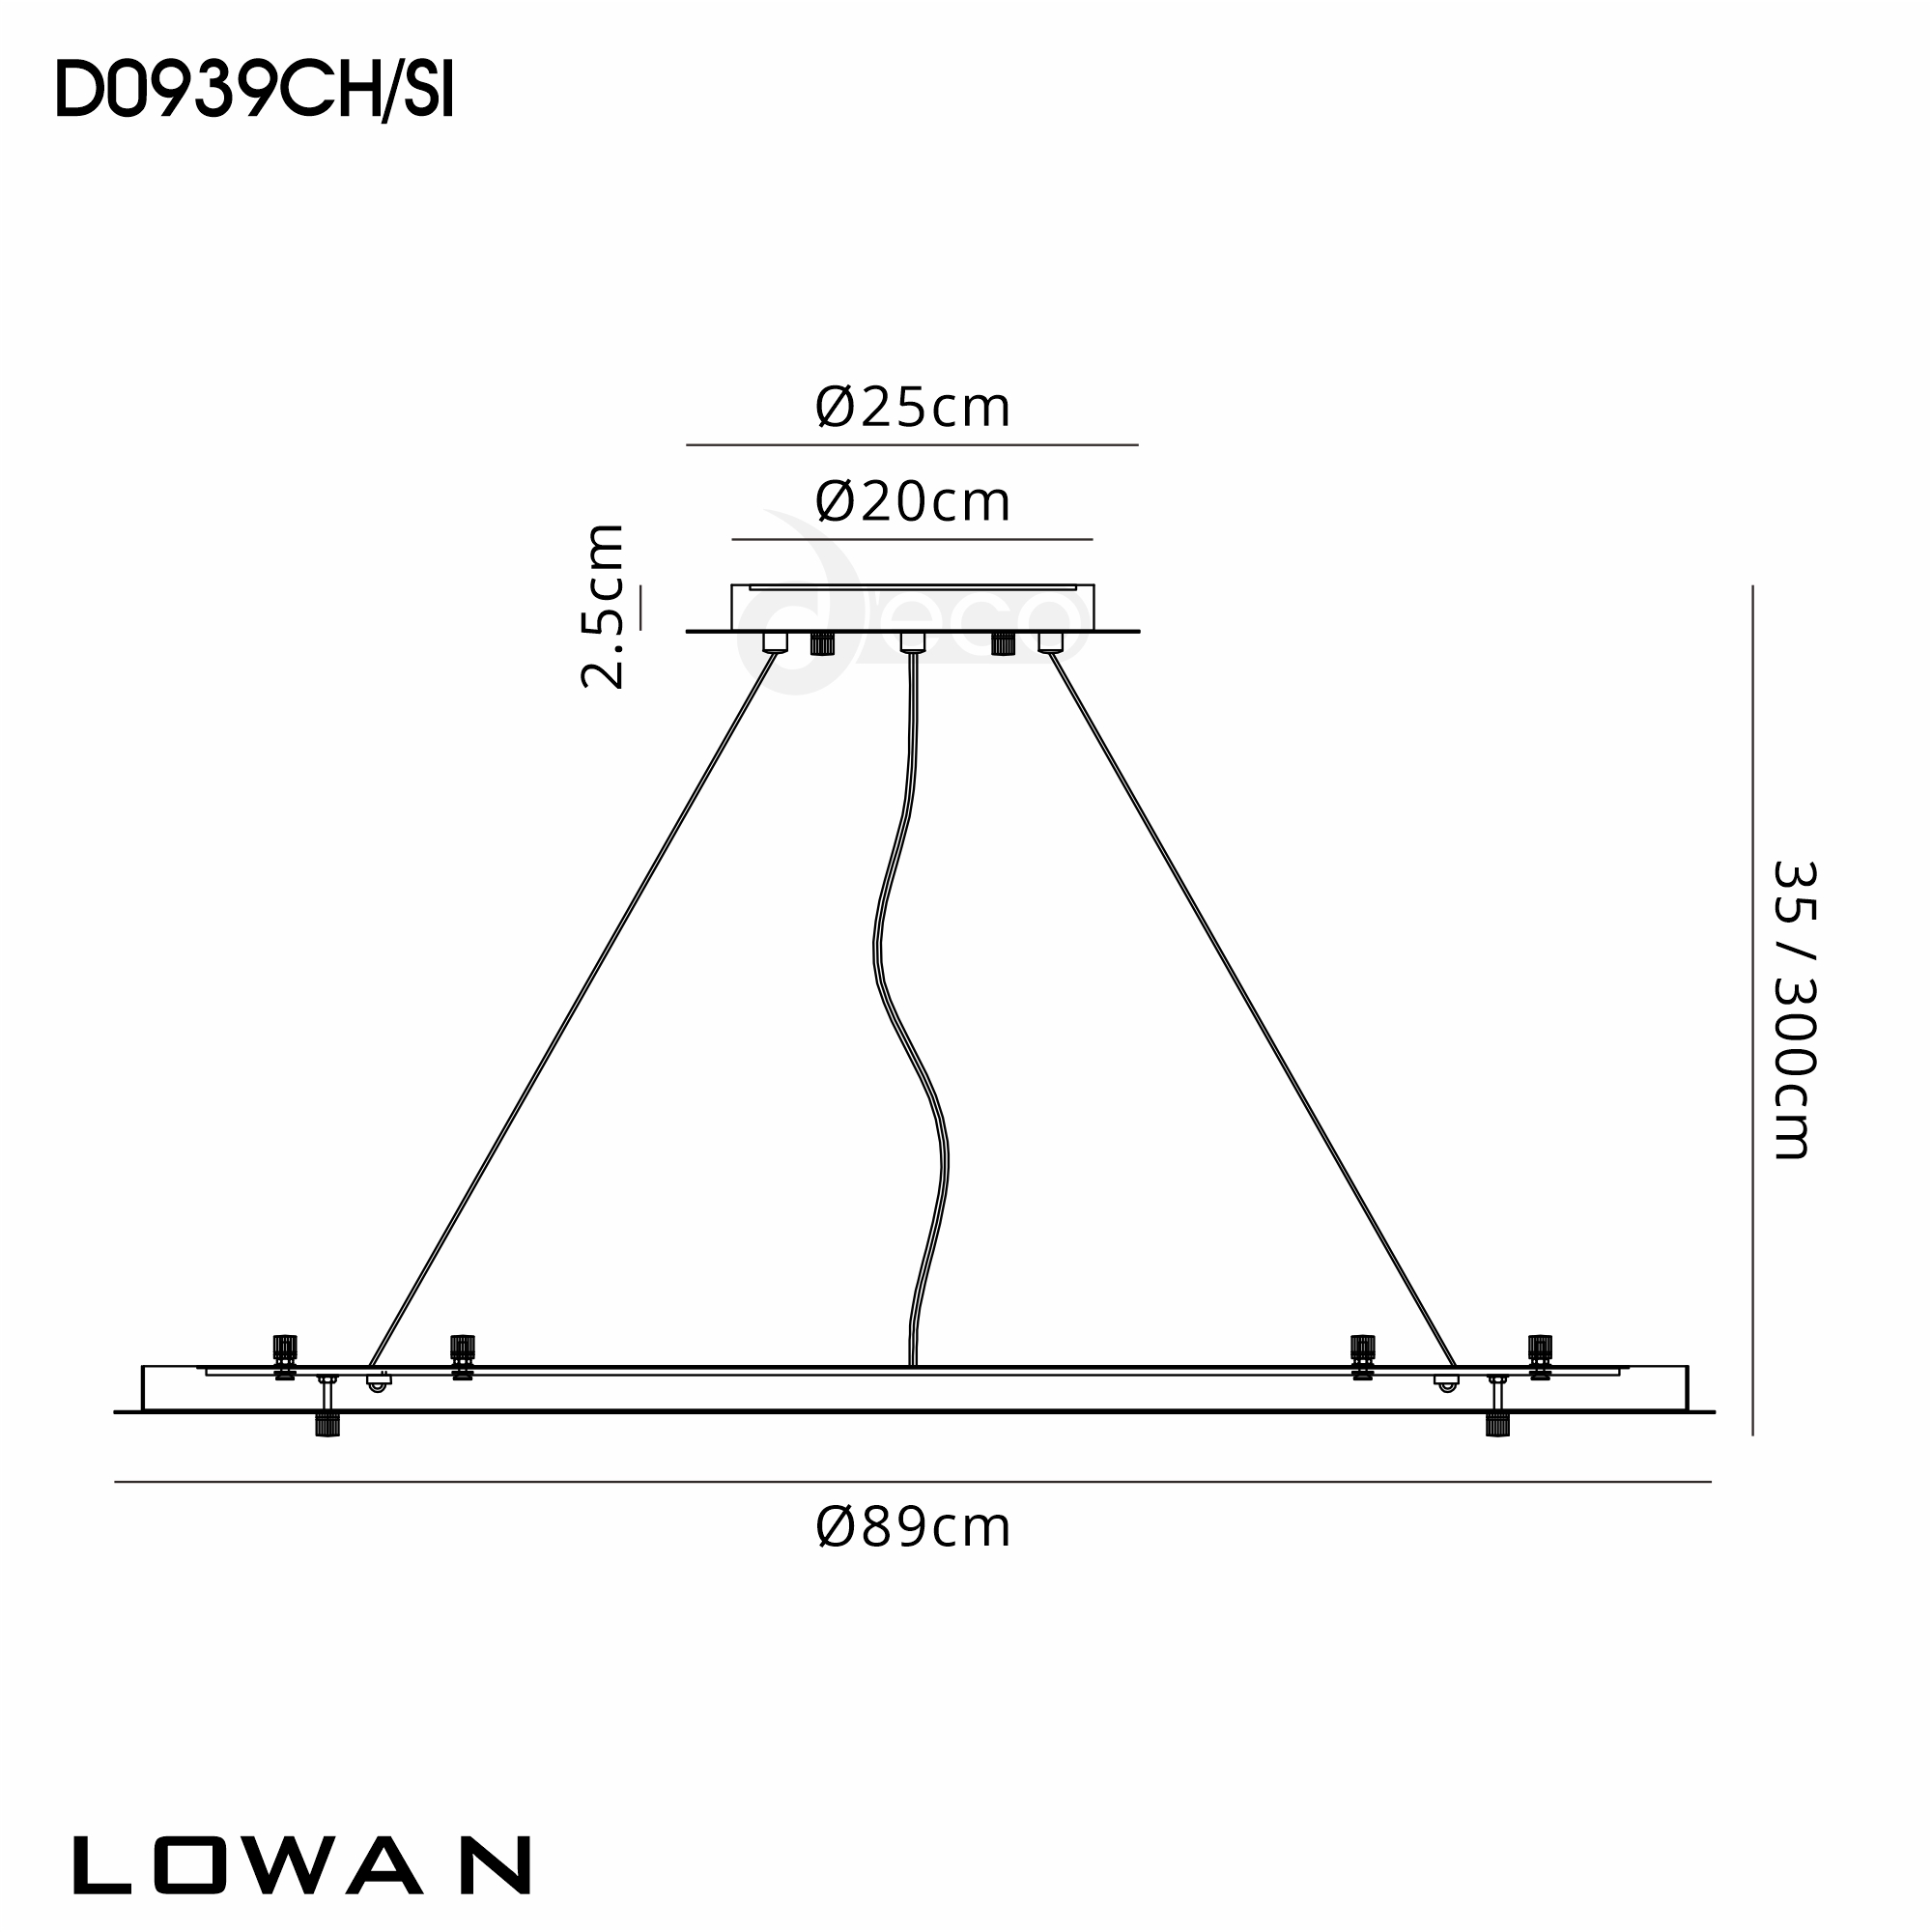 D0939CH/SI  Lowan 890mm, 3m Suspension Plate c/w Power Cable To Lower Flush Fittings, Polished Chrome/Silver Max Load 40kg (ONLY TESTED FOR OUR RANGE OF PRODUCTS)